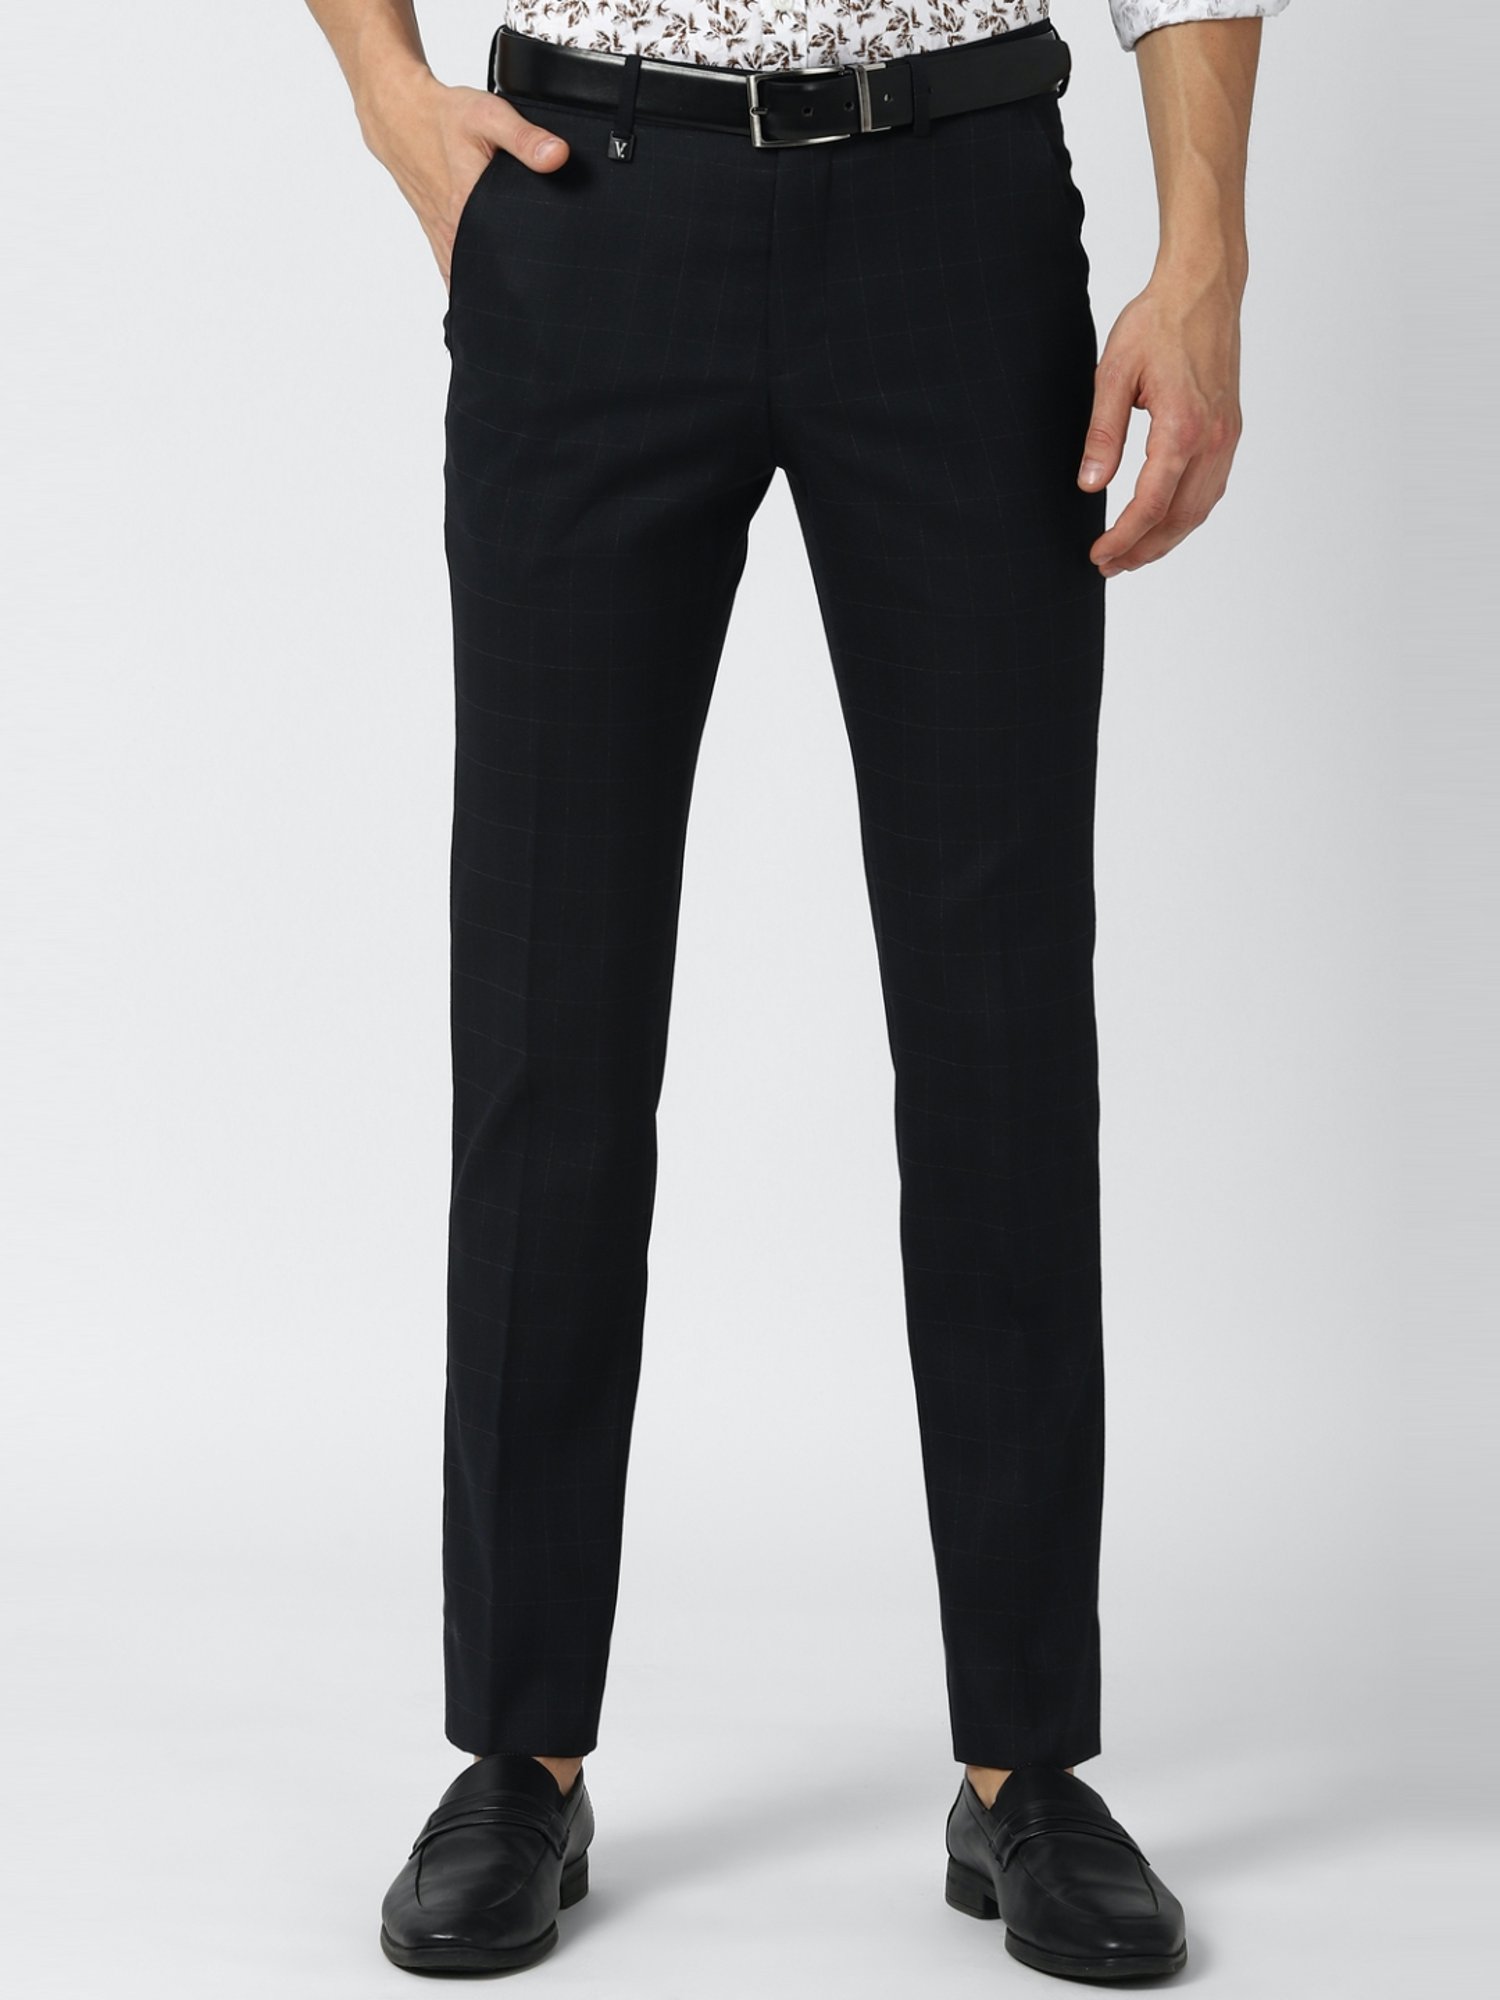 Black Skinny Fit Trousers with Eyelet and Lace Tieup Detail  Benoit